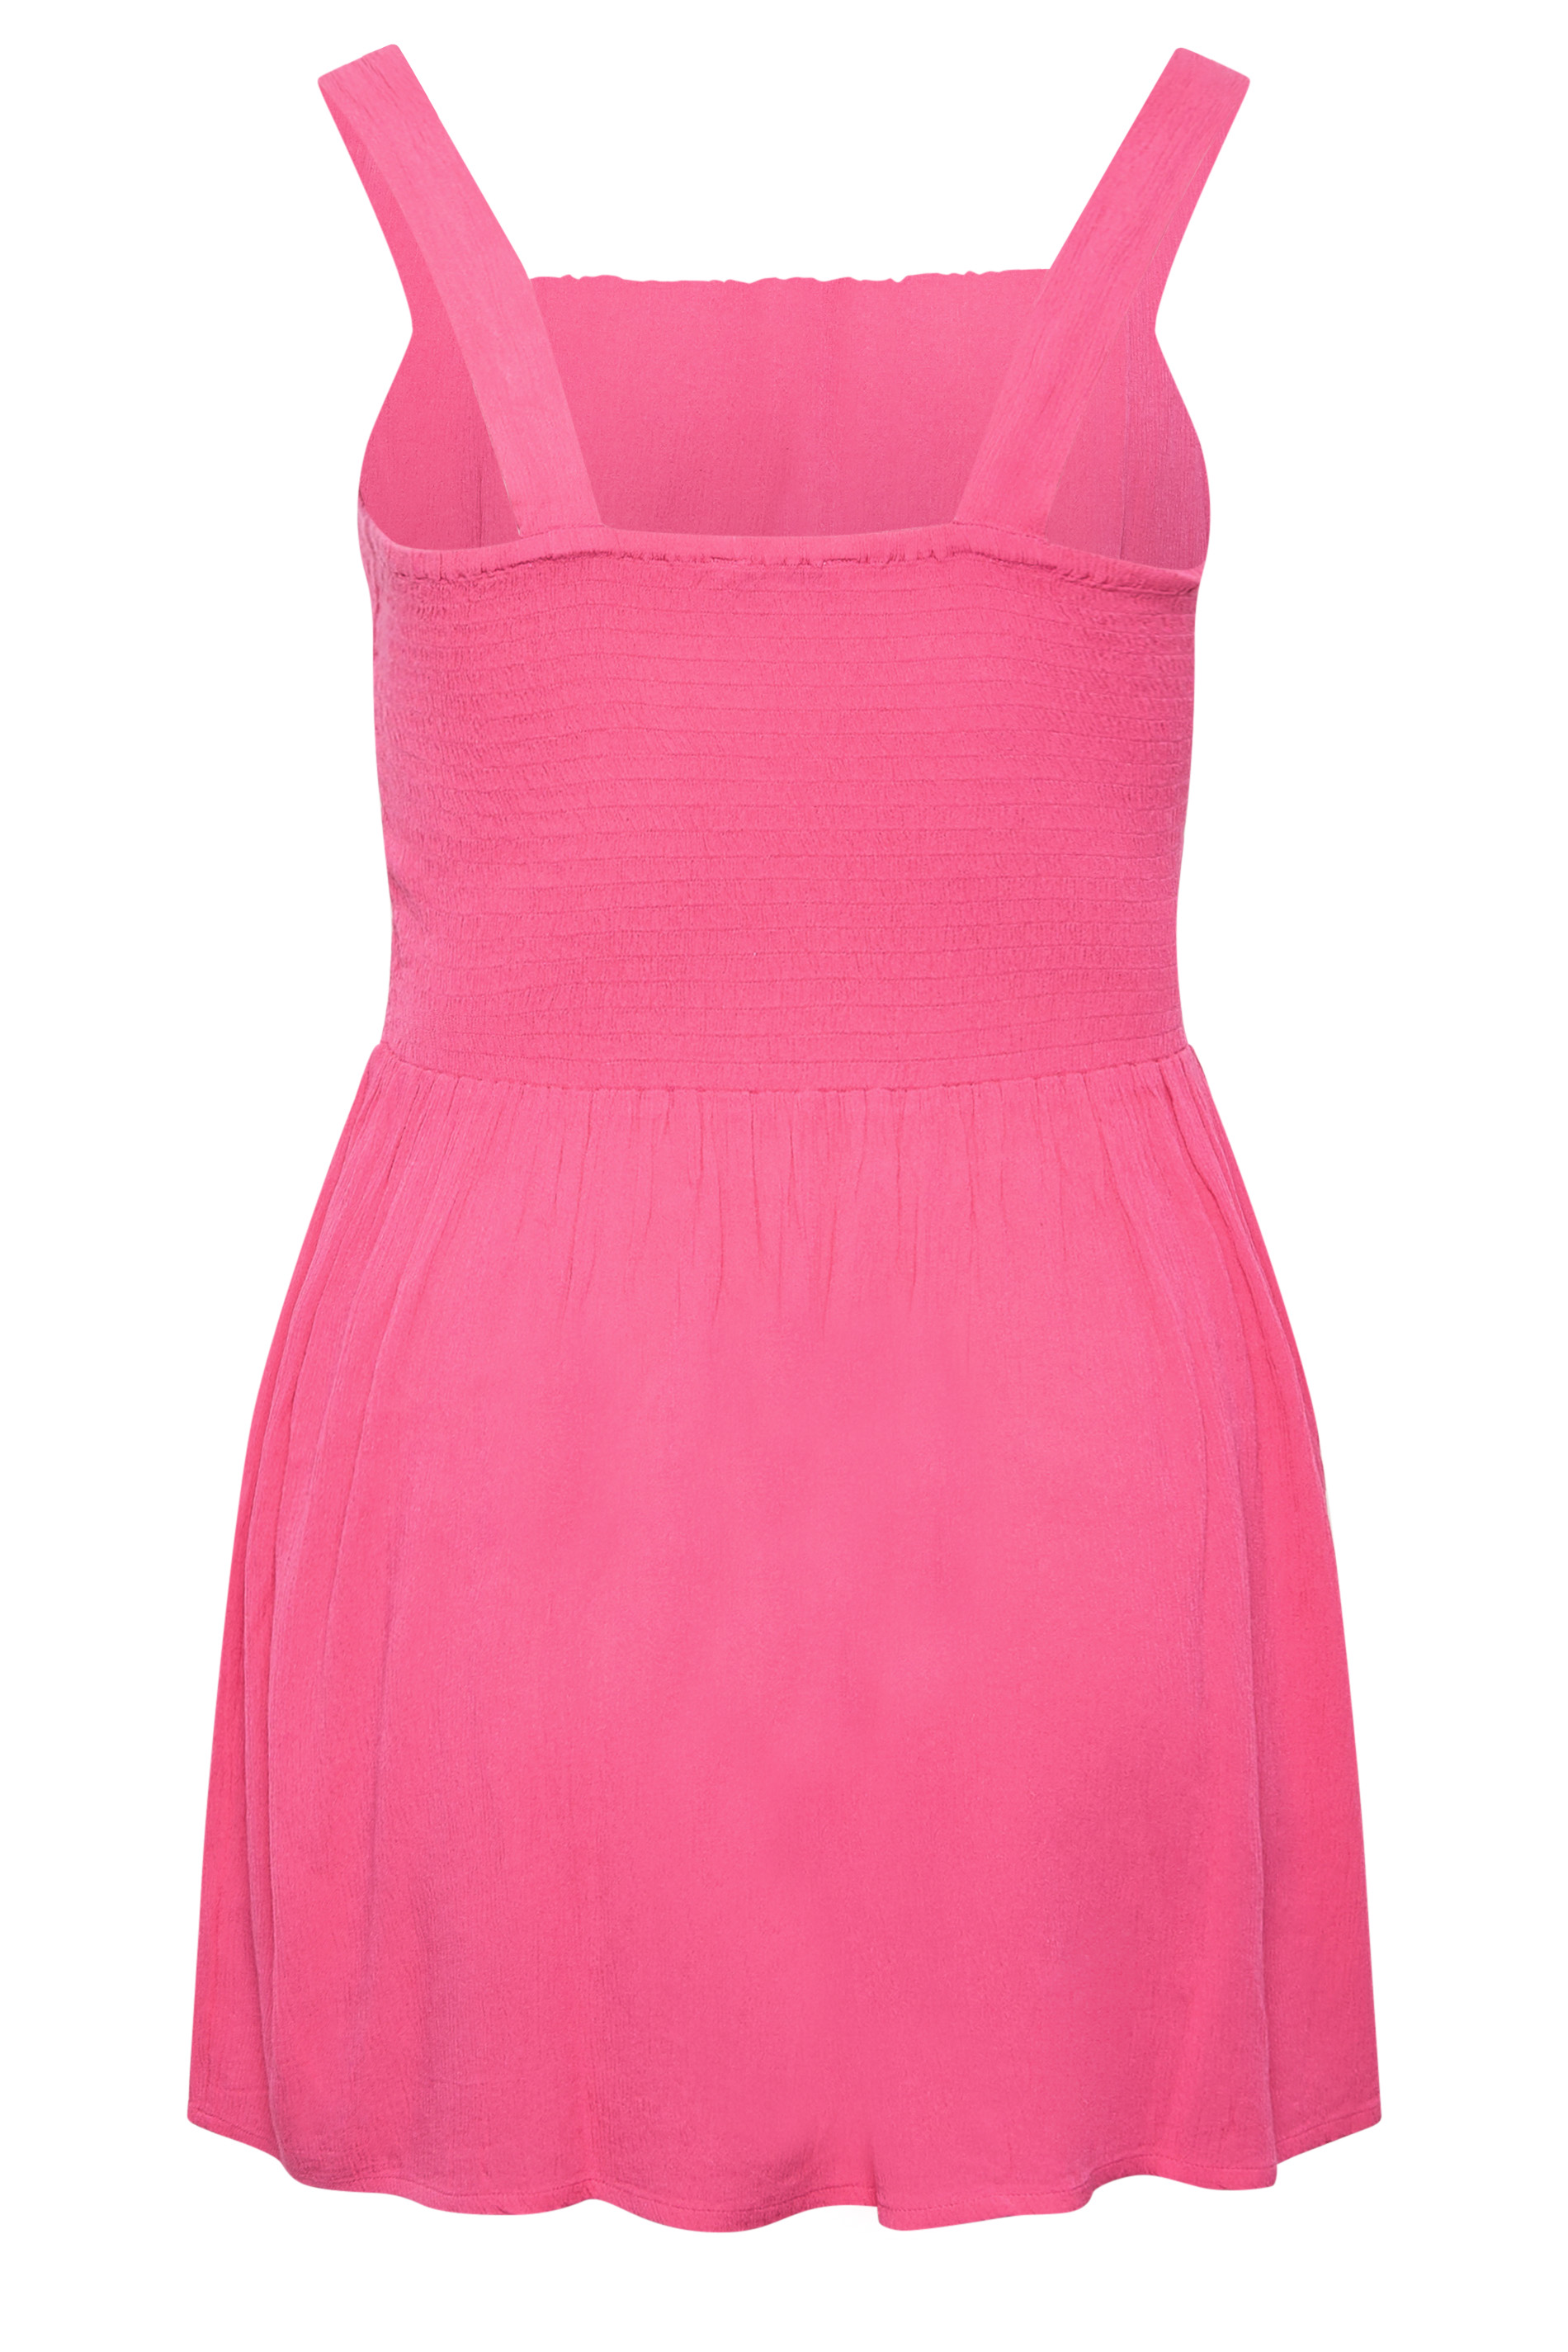 YOURS Plus Size Hot Pink Crinkle Vest Top | Yours Clothing